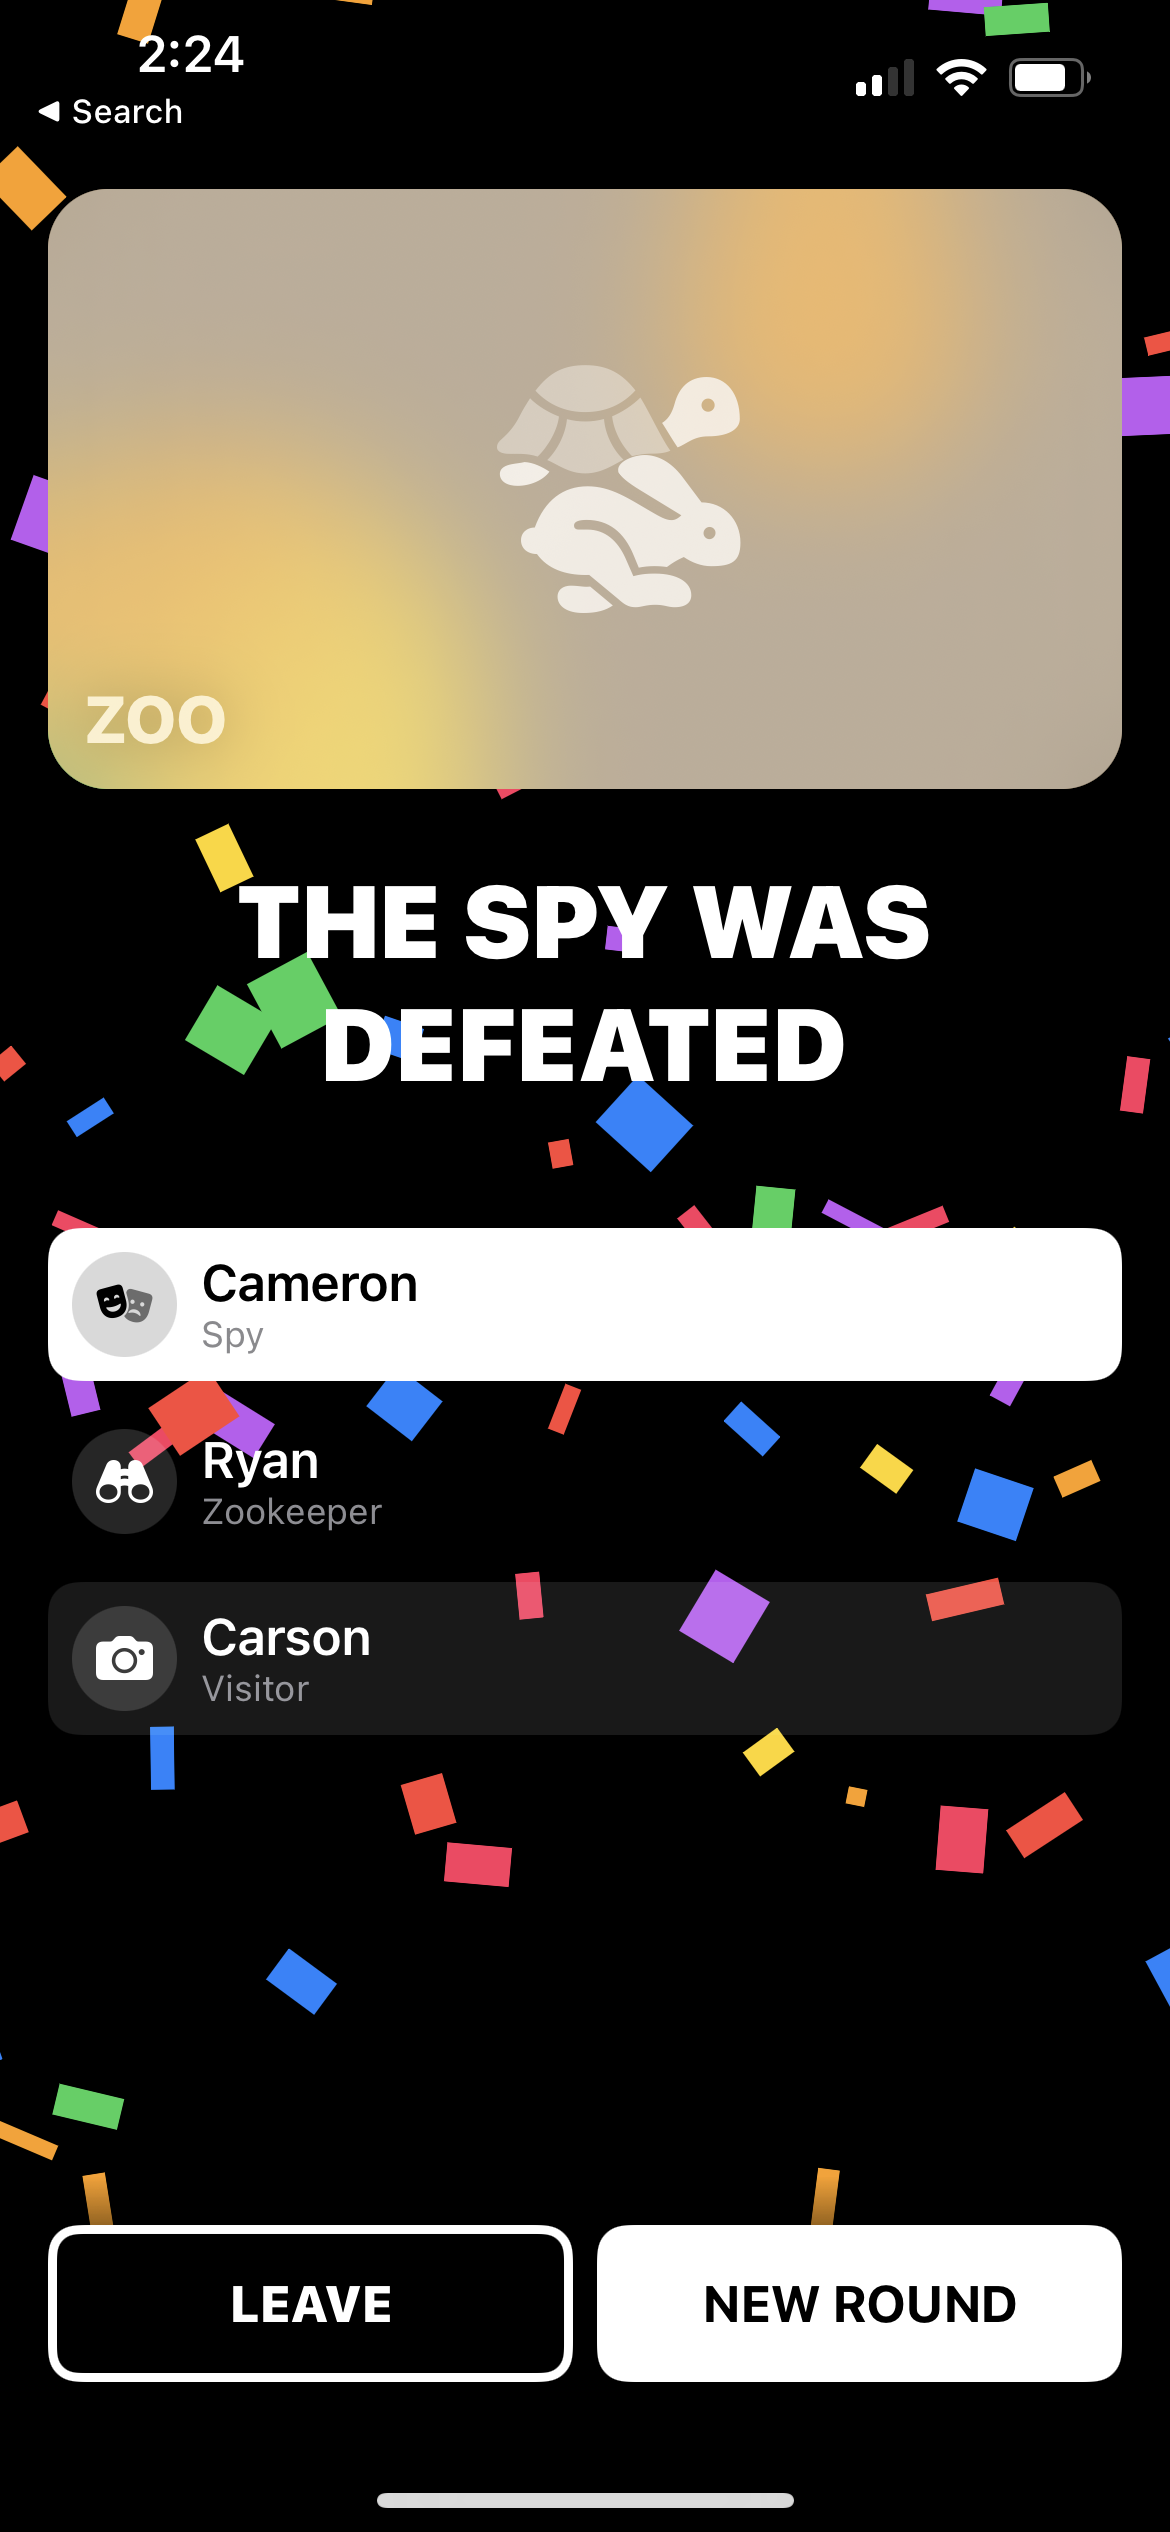 The spy was defeated!